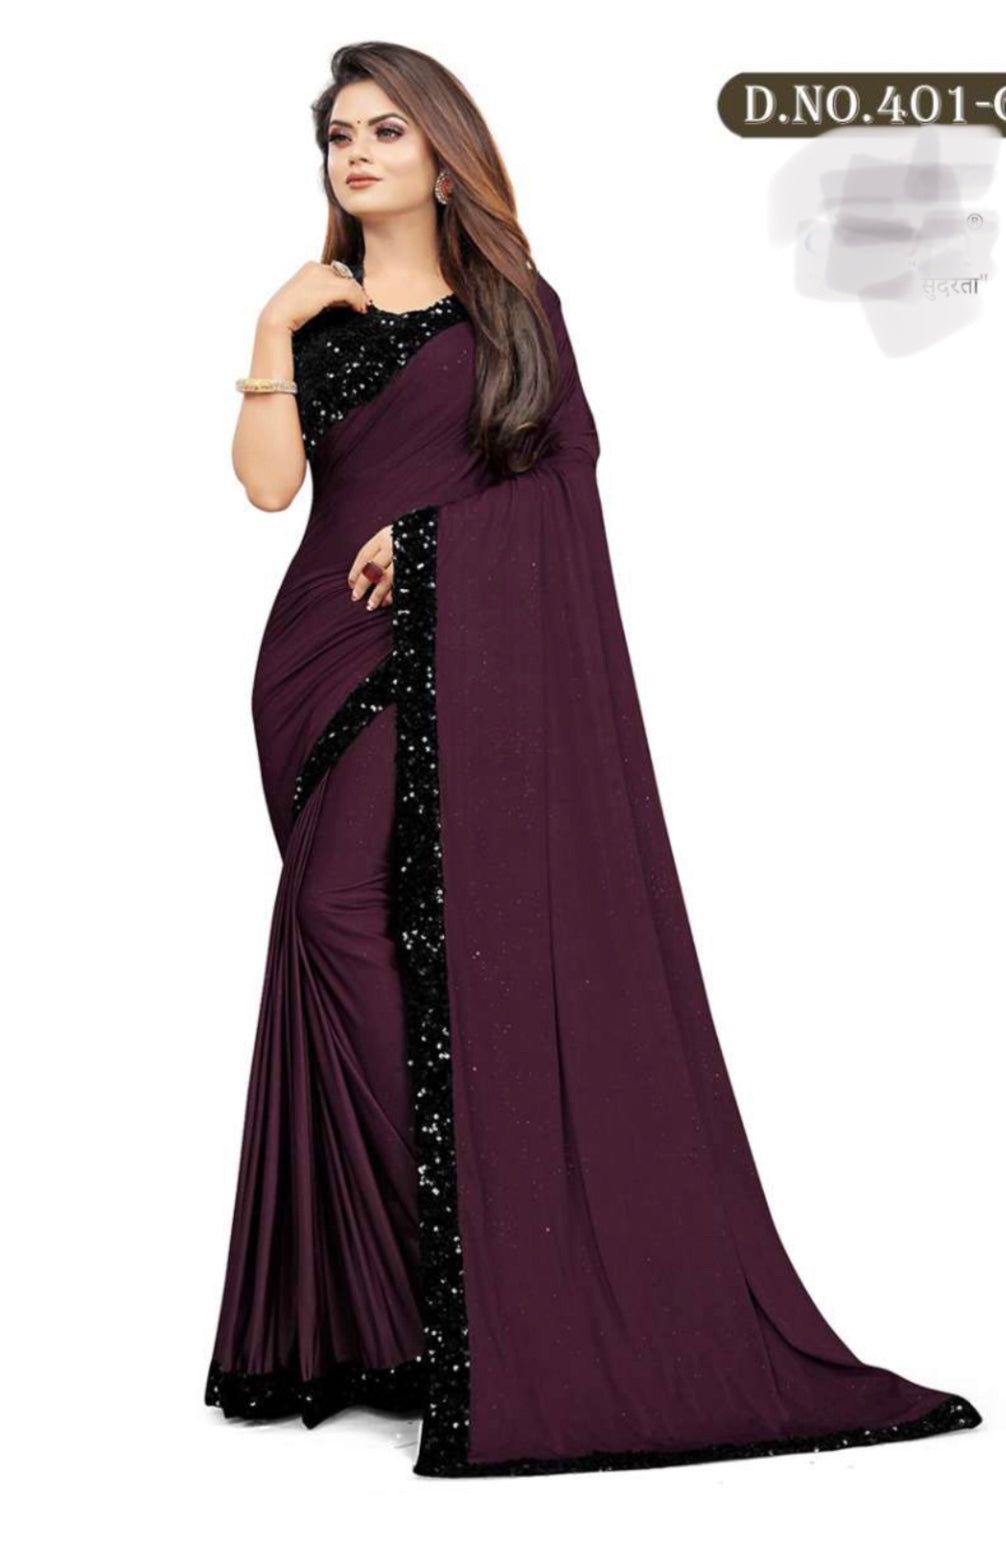 Party Wear Saree with Ready-to-Wear Blouse for Effortless Glamour